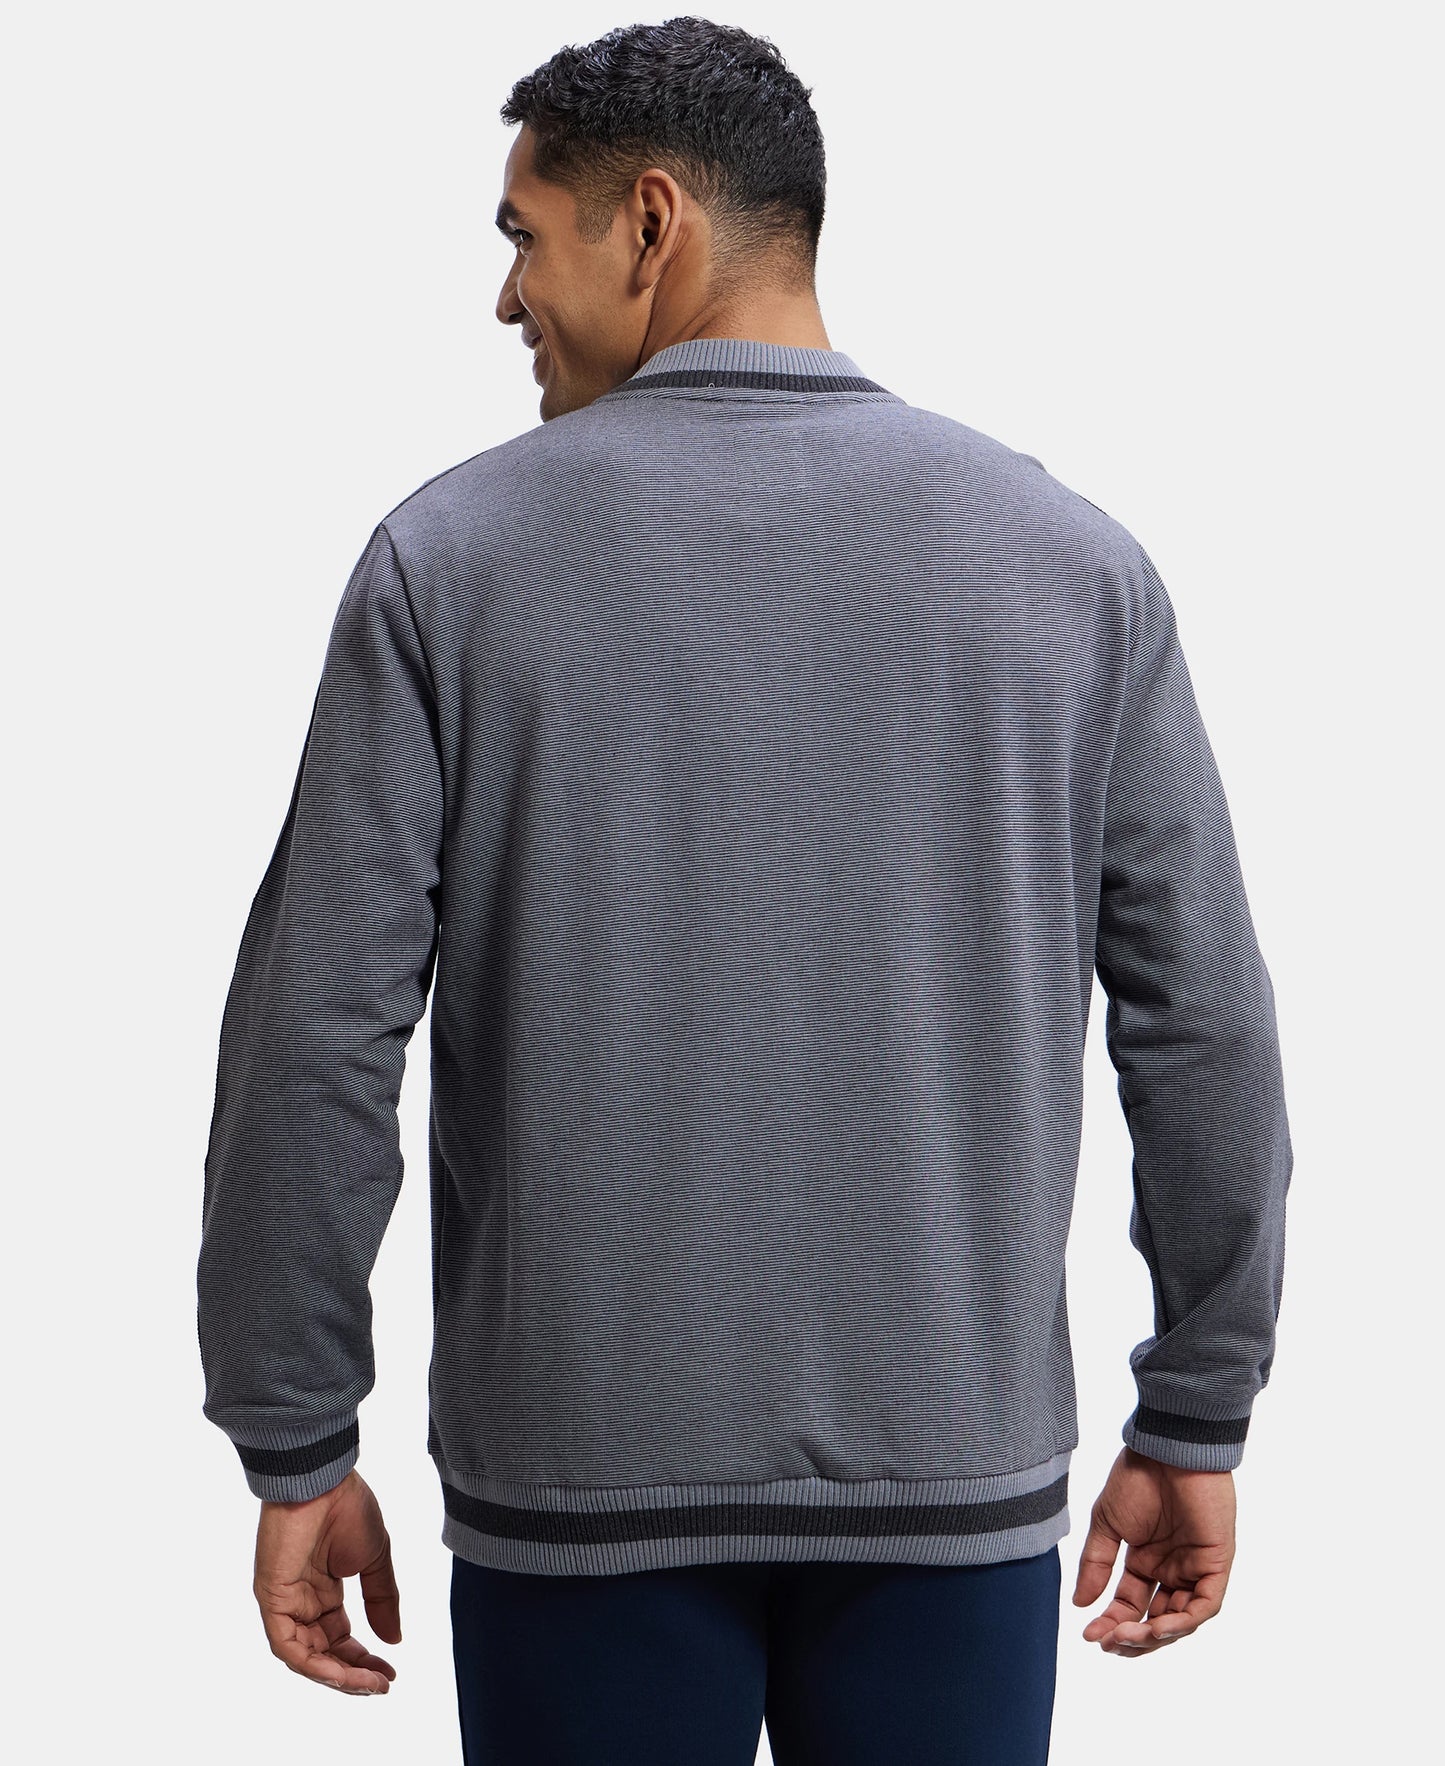 Super Combed Cotton Rich Fleece Jacket With StayWarm Technology - Performance Grey / Charcoal Melange-3